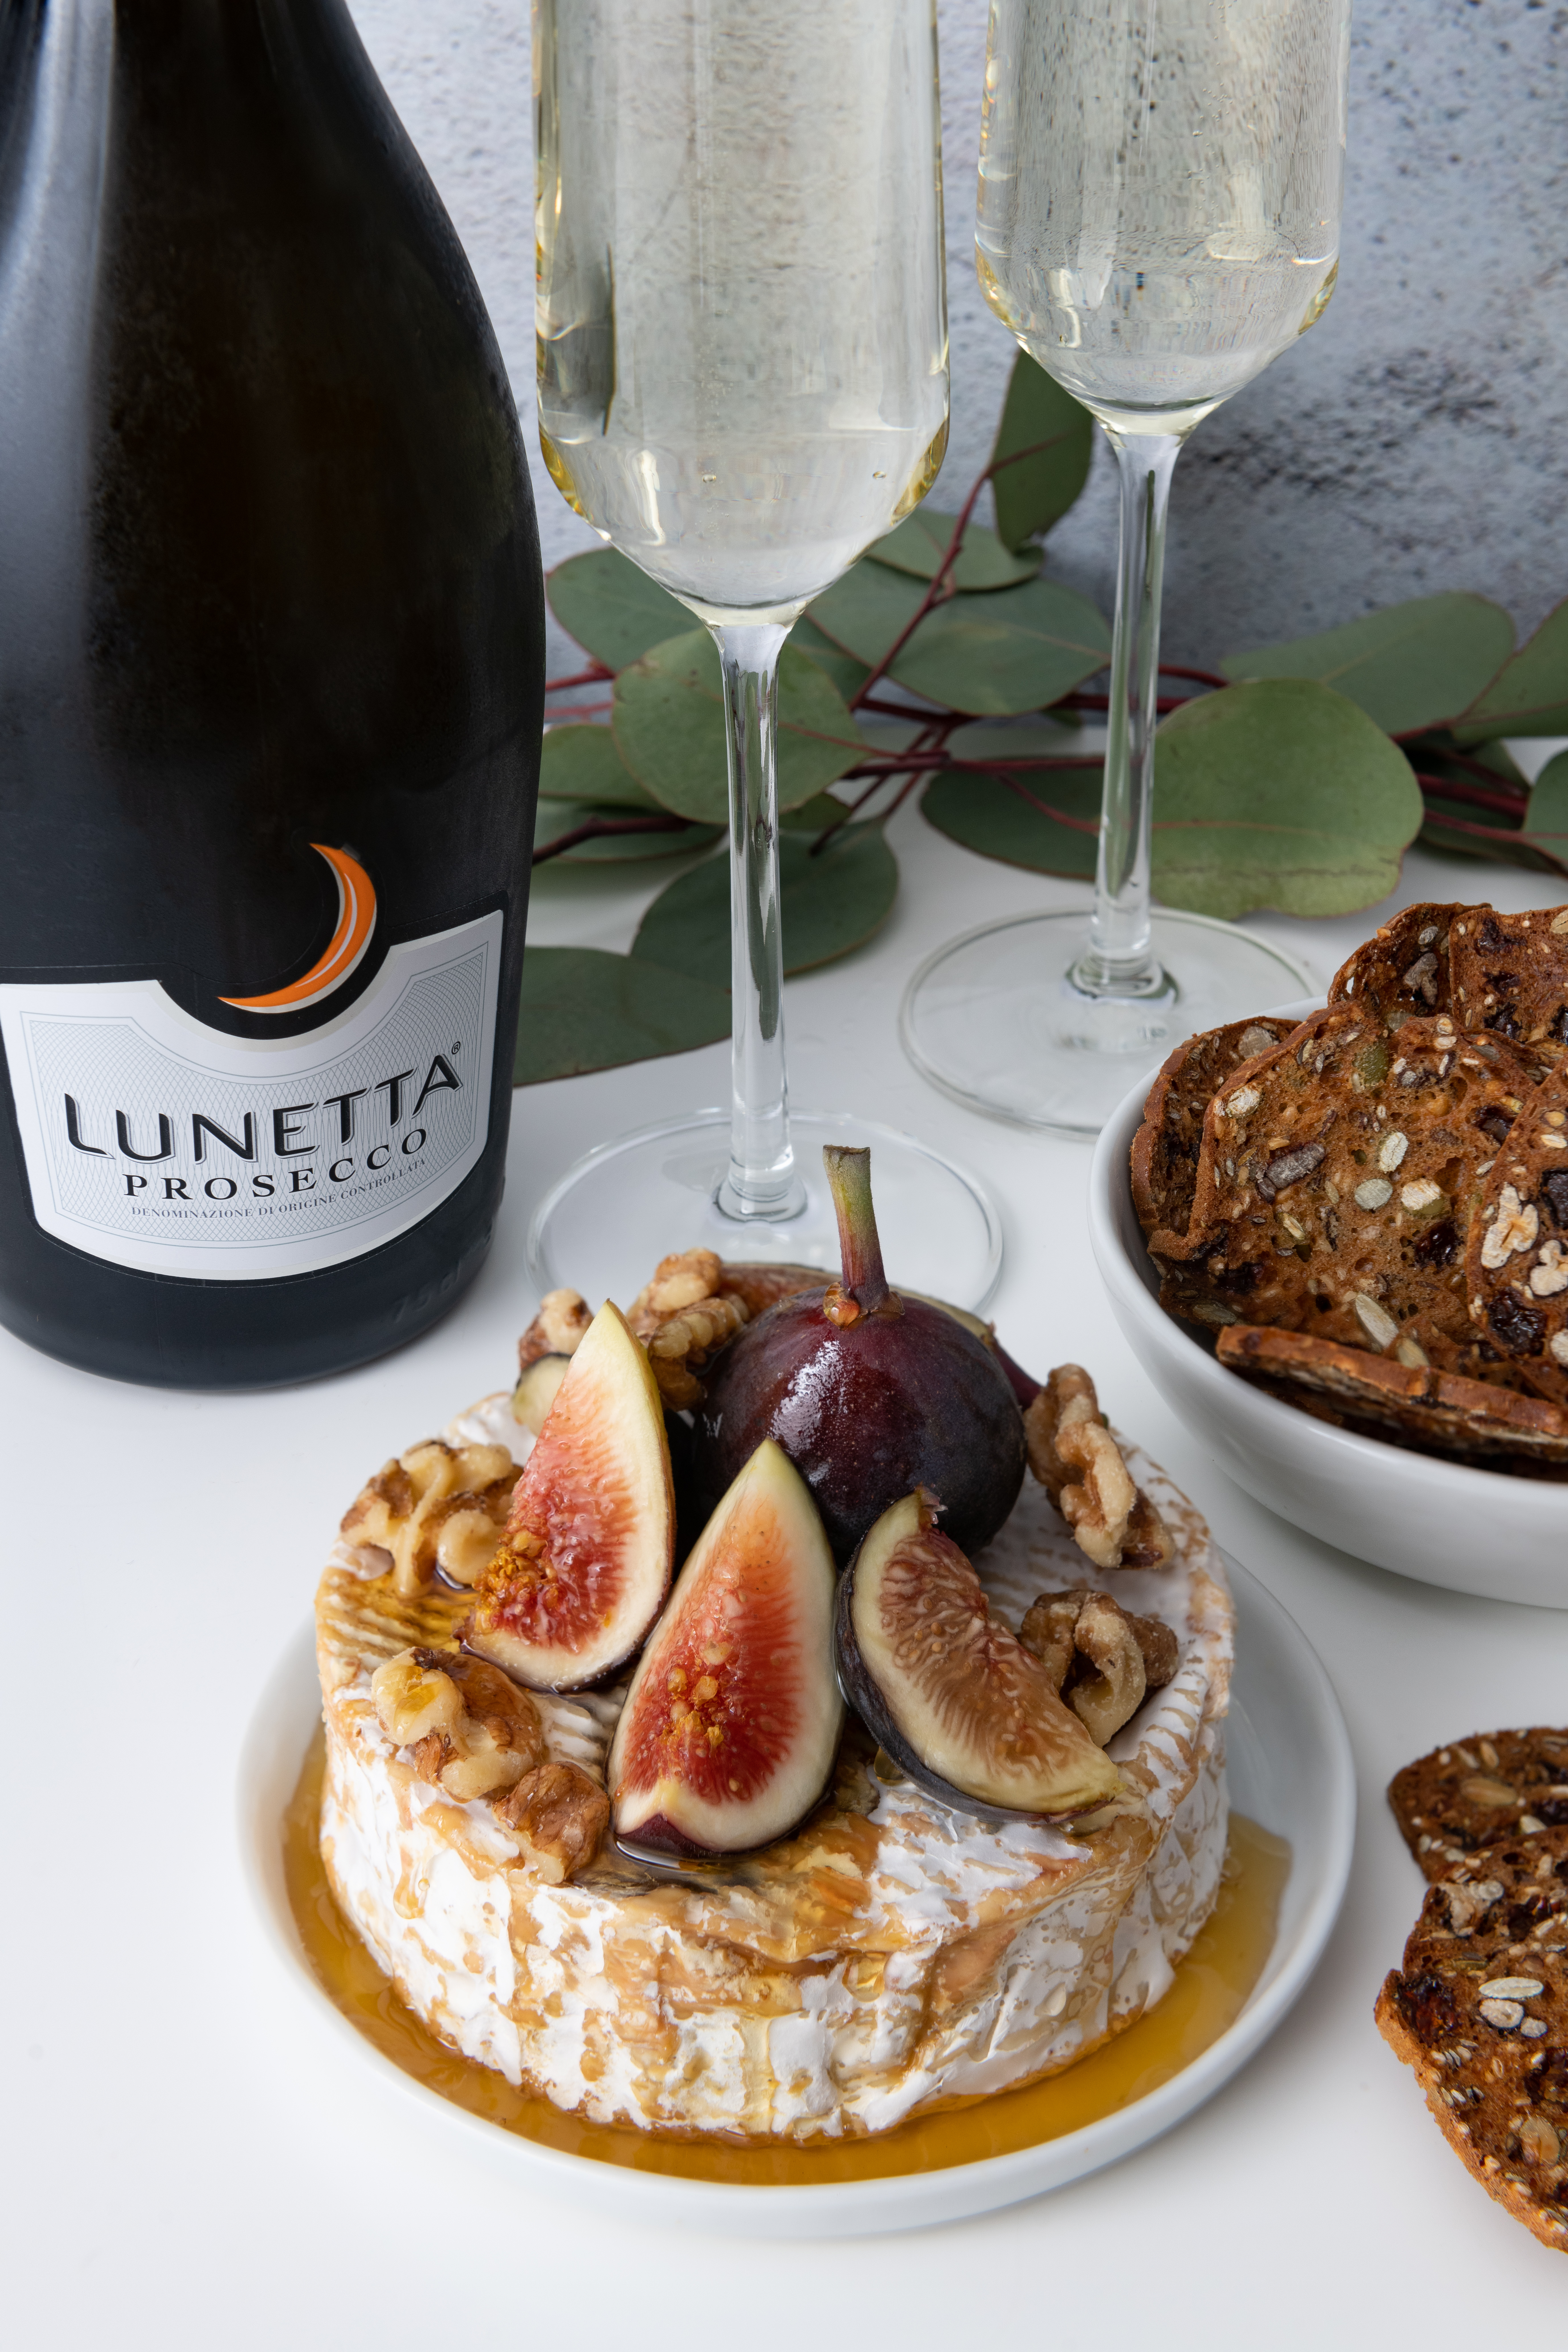 Chicago + NYC Beverage Photographer - Lunetta Prosecco with Figs